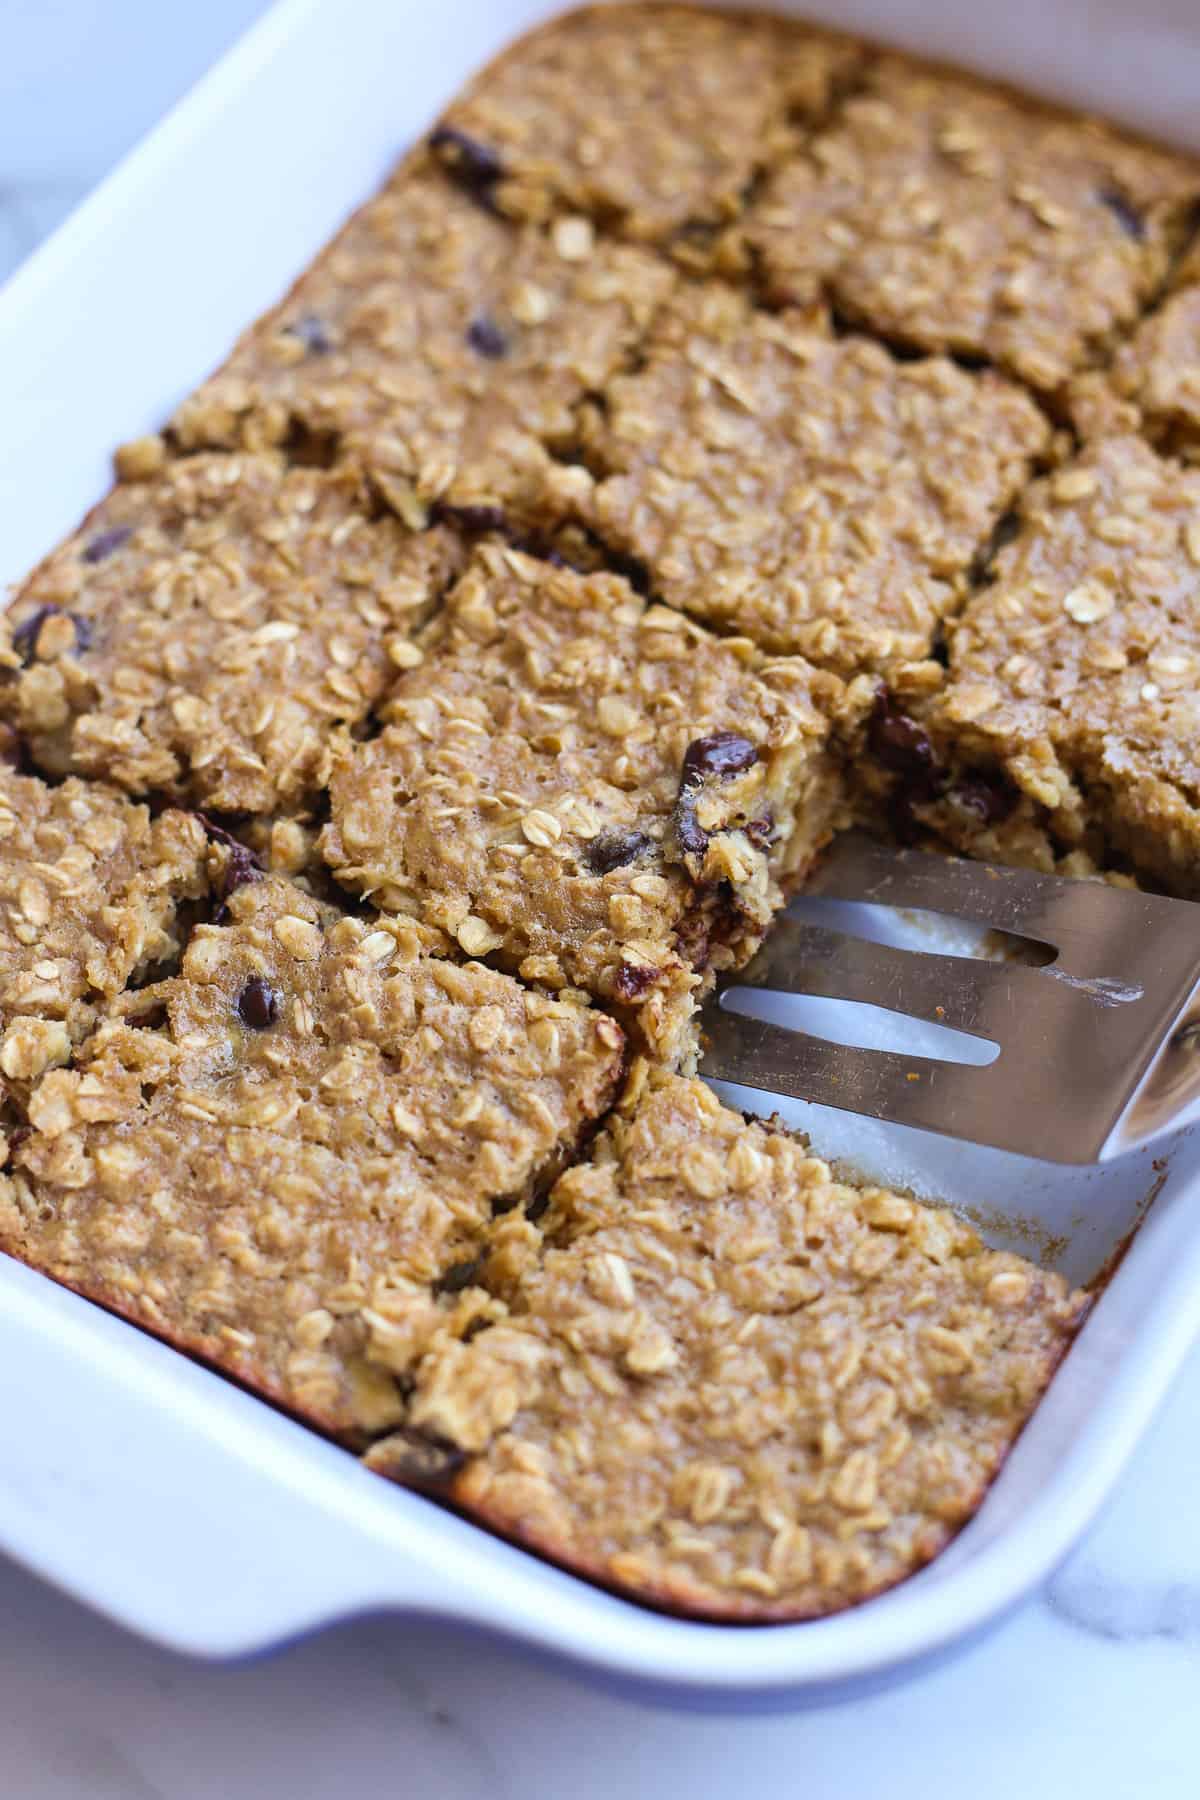 Banana baked oatmeal in a casserole dish sliced into squares for serving.